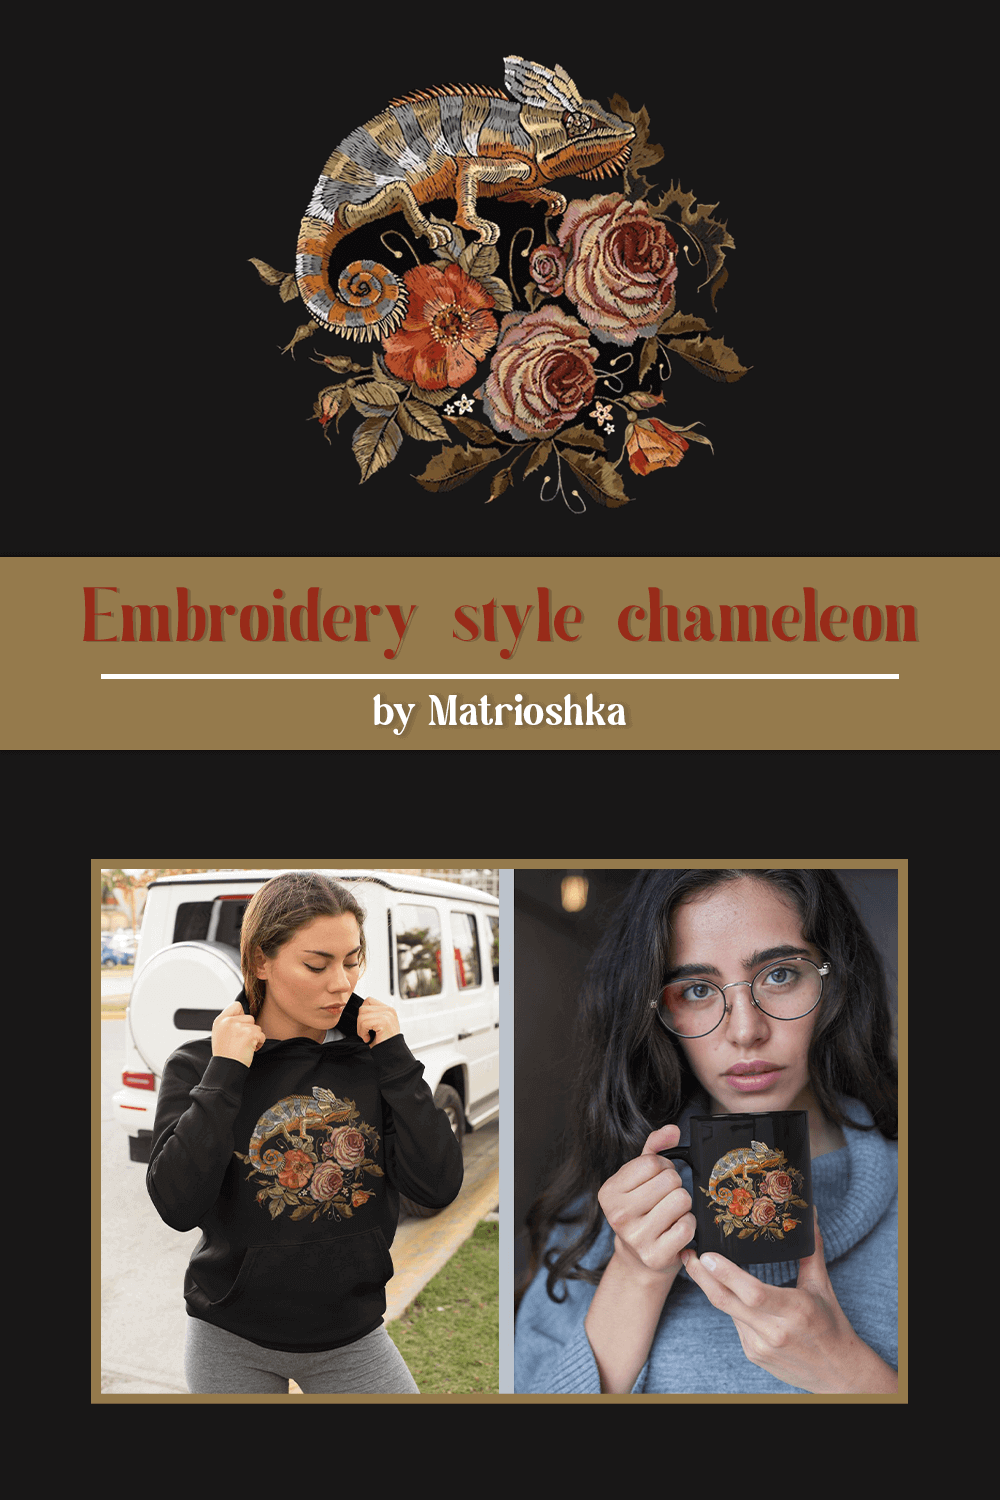 Chameleon embroidery on black pullover and black cup.